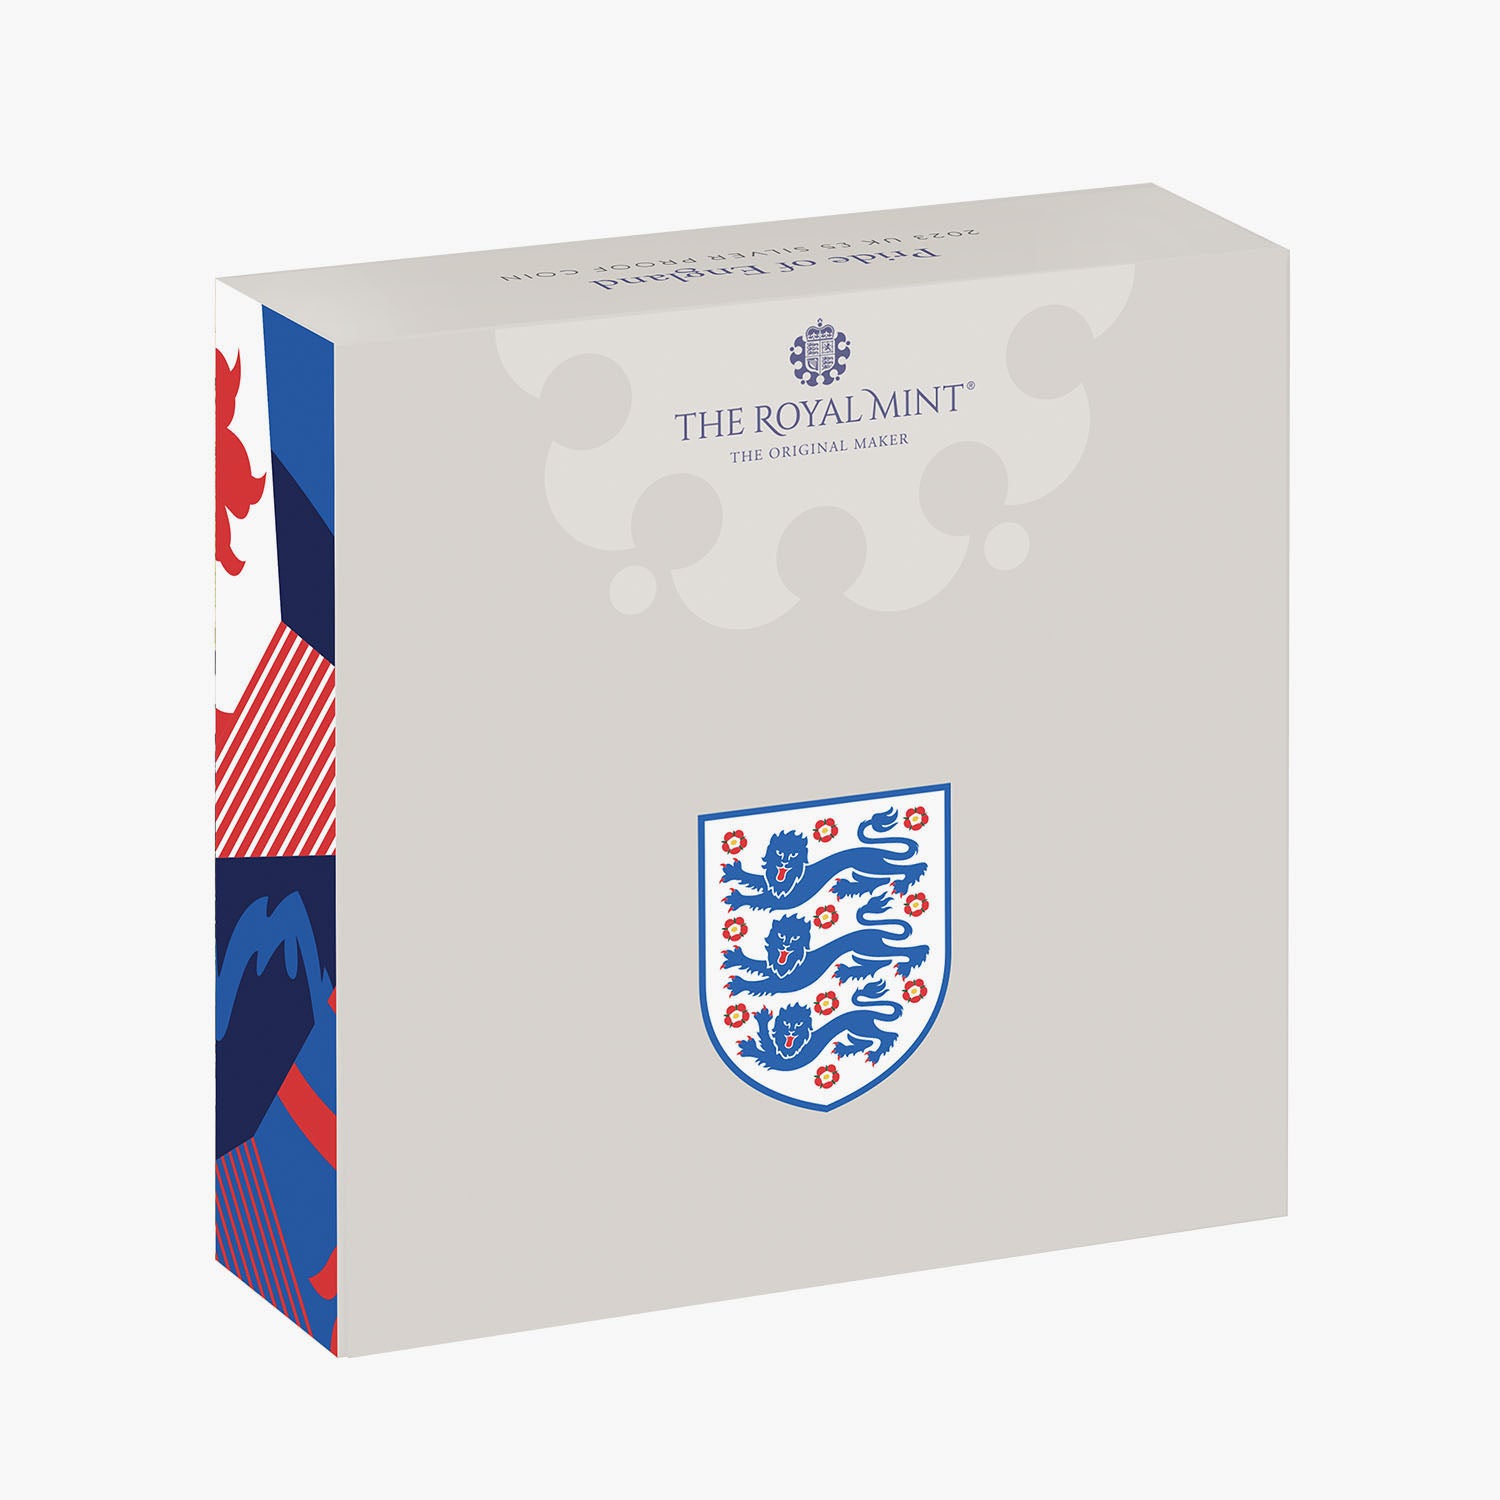 Women's World Cup - Pride of England 2023 UK £5 Silver Proof Coin